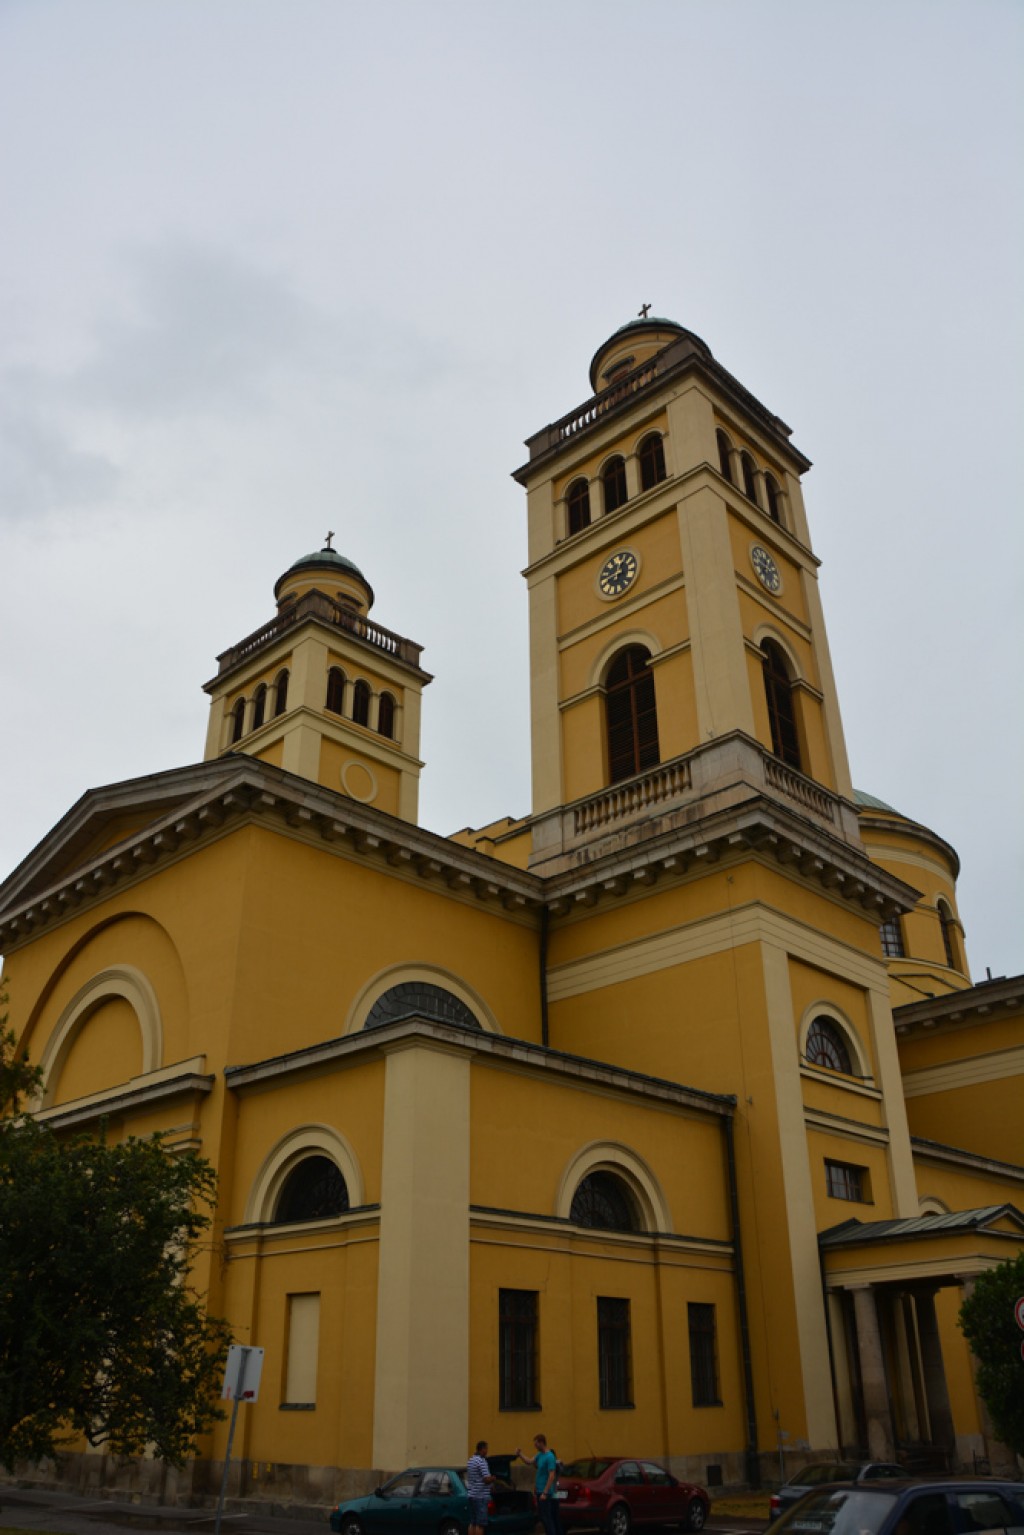 Cathedral Basilica of St. John the Apostle, Eger